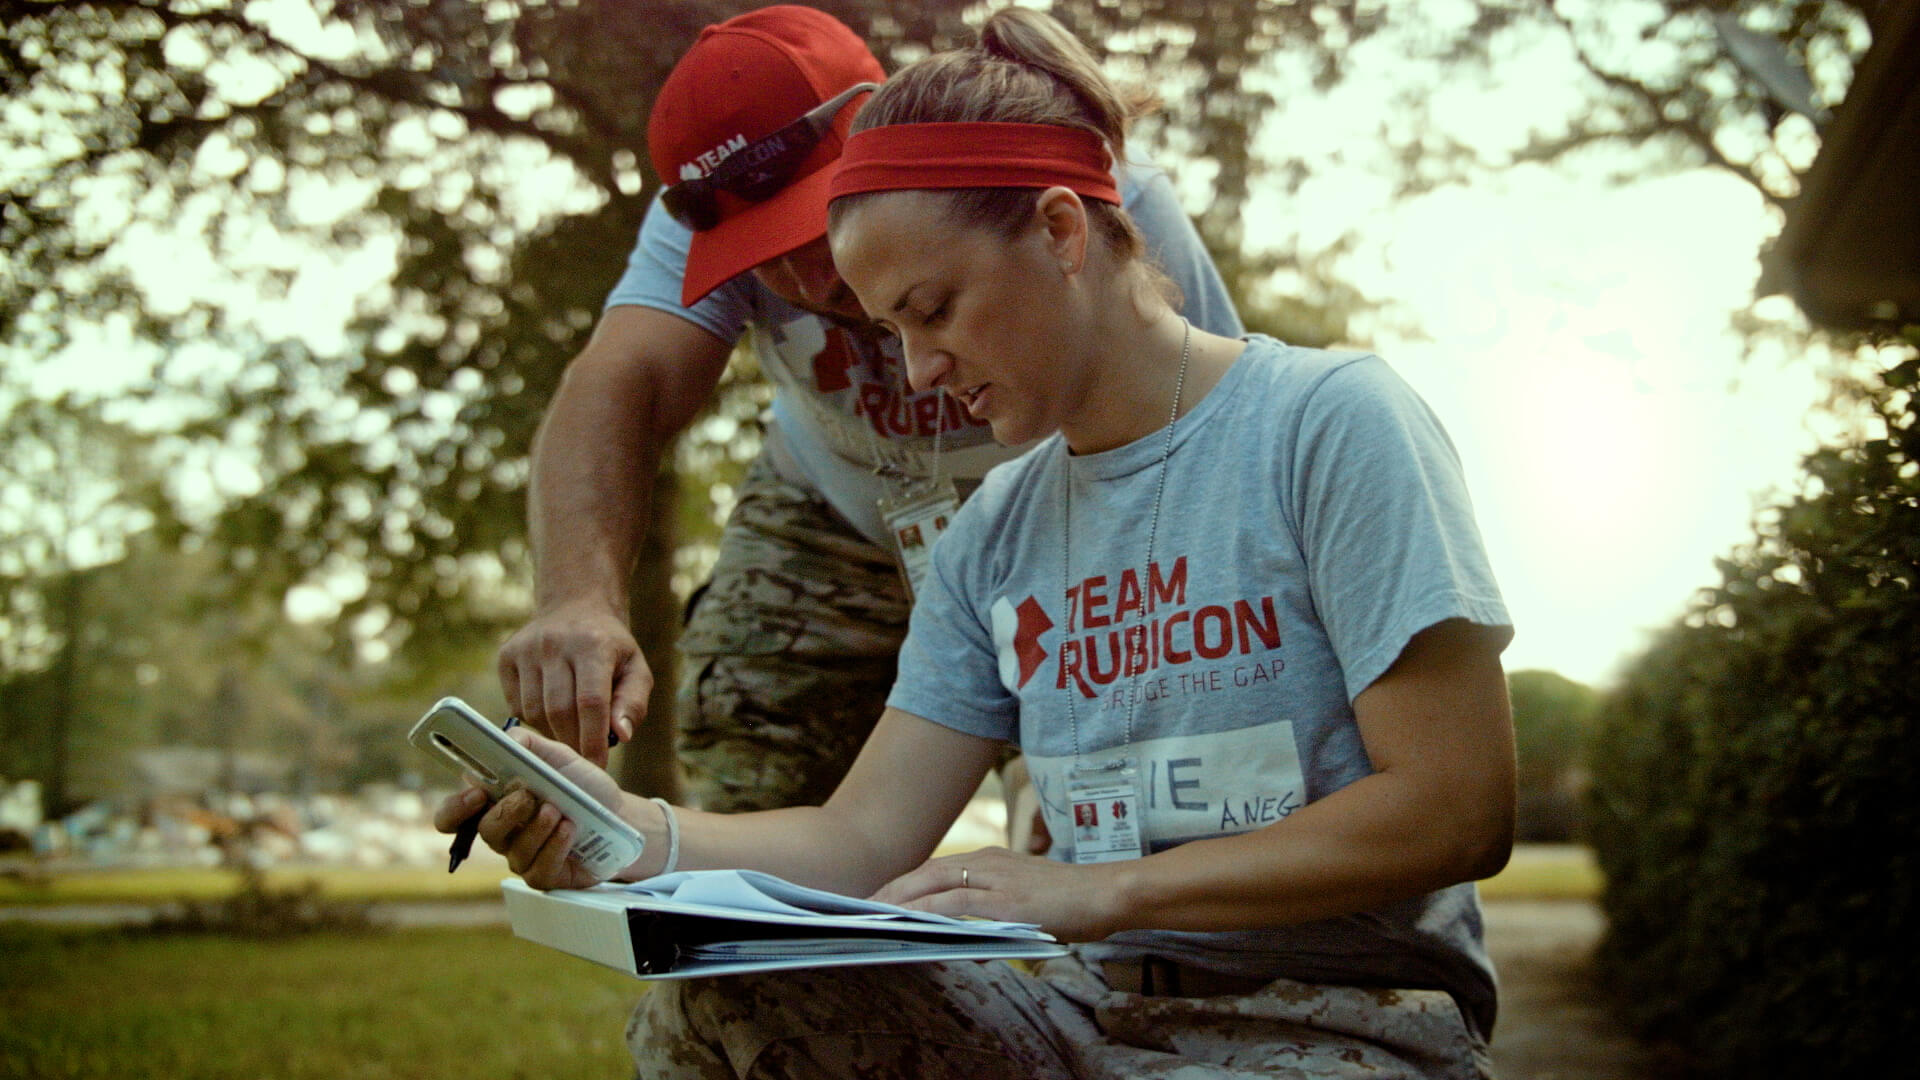 Members of Team Rubicon working in the field